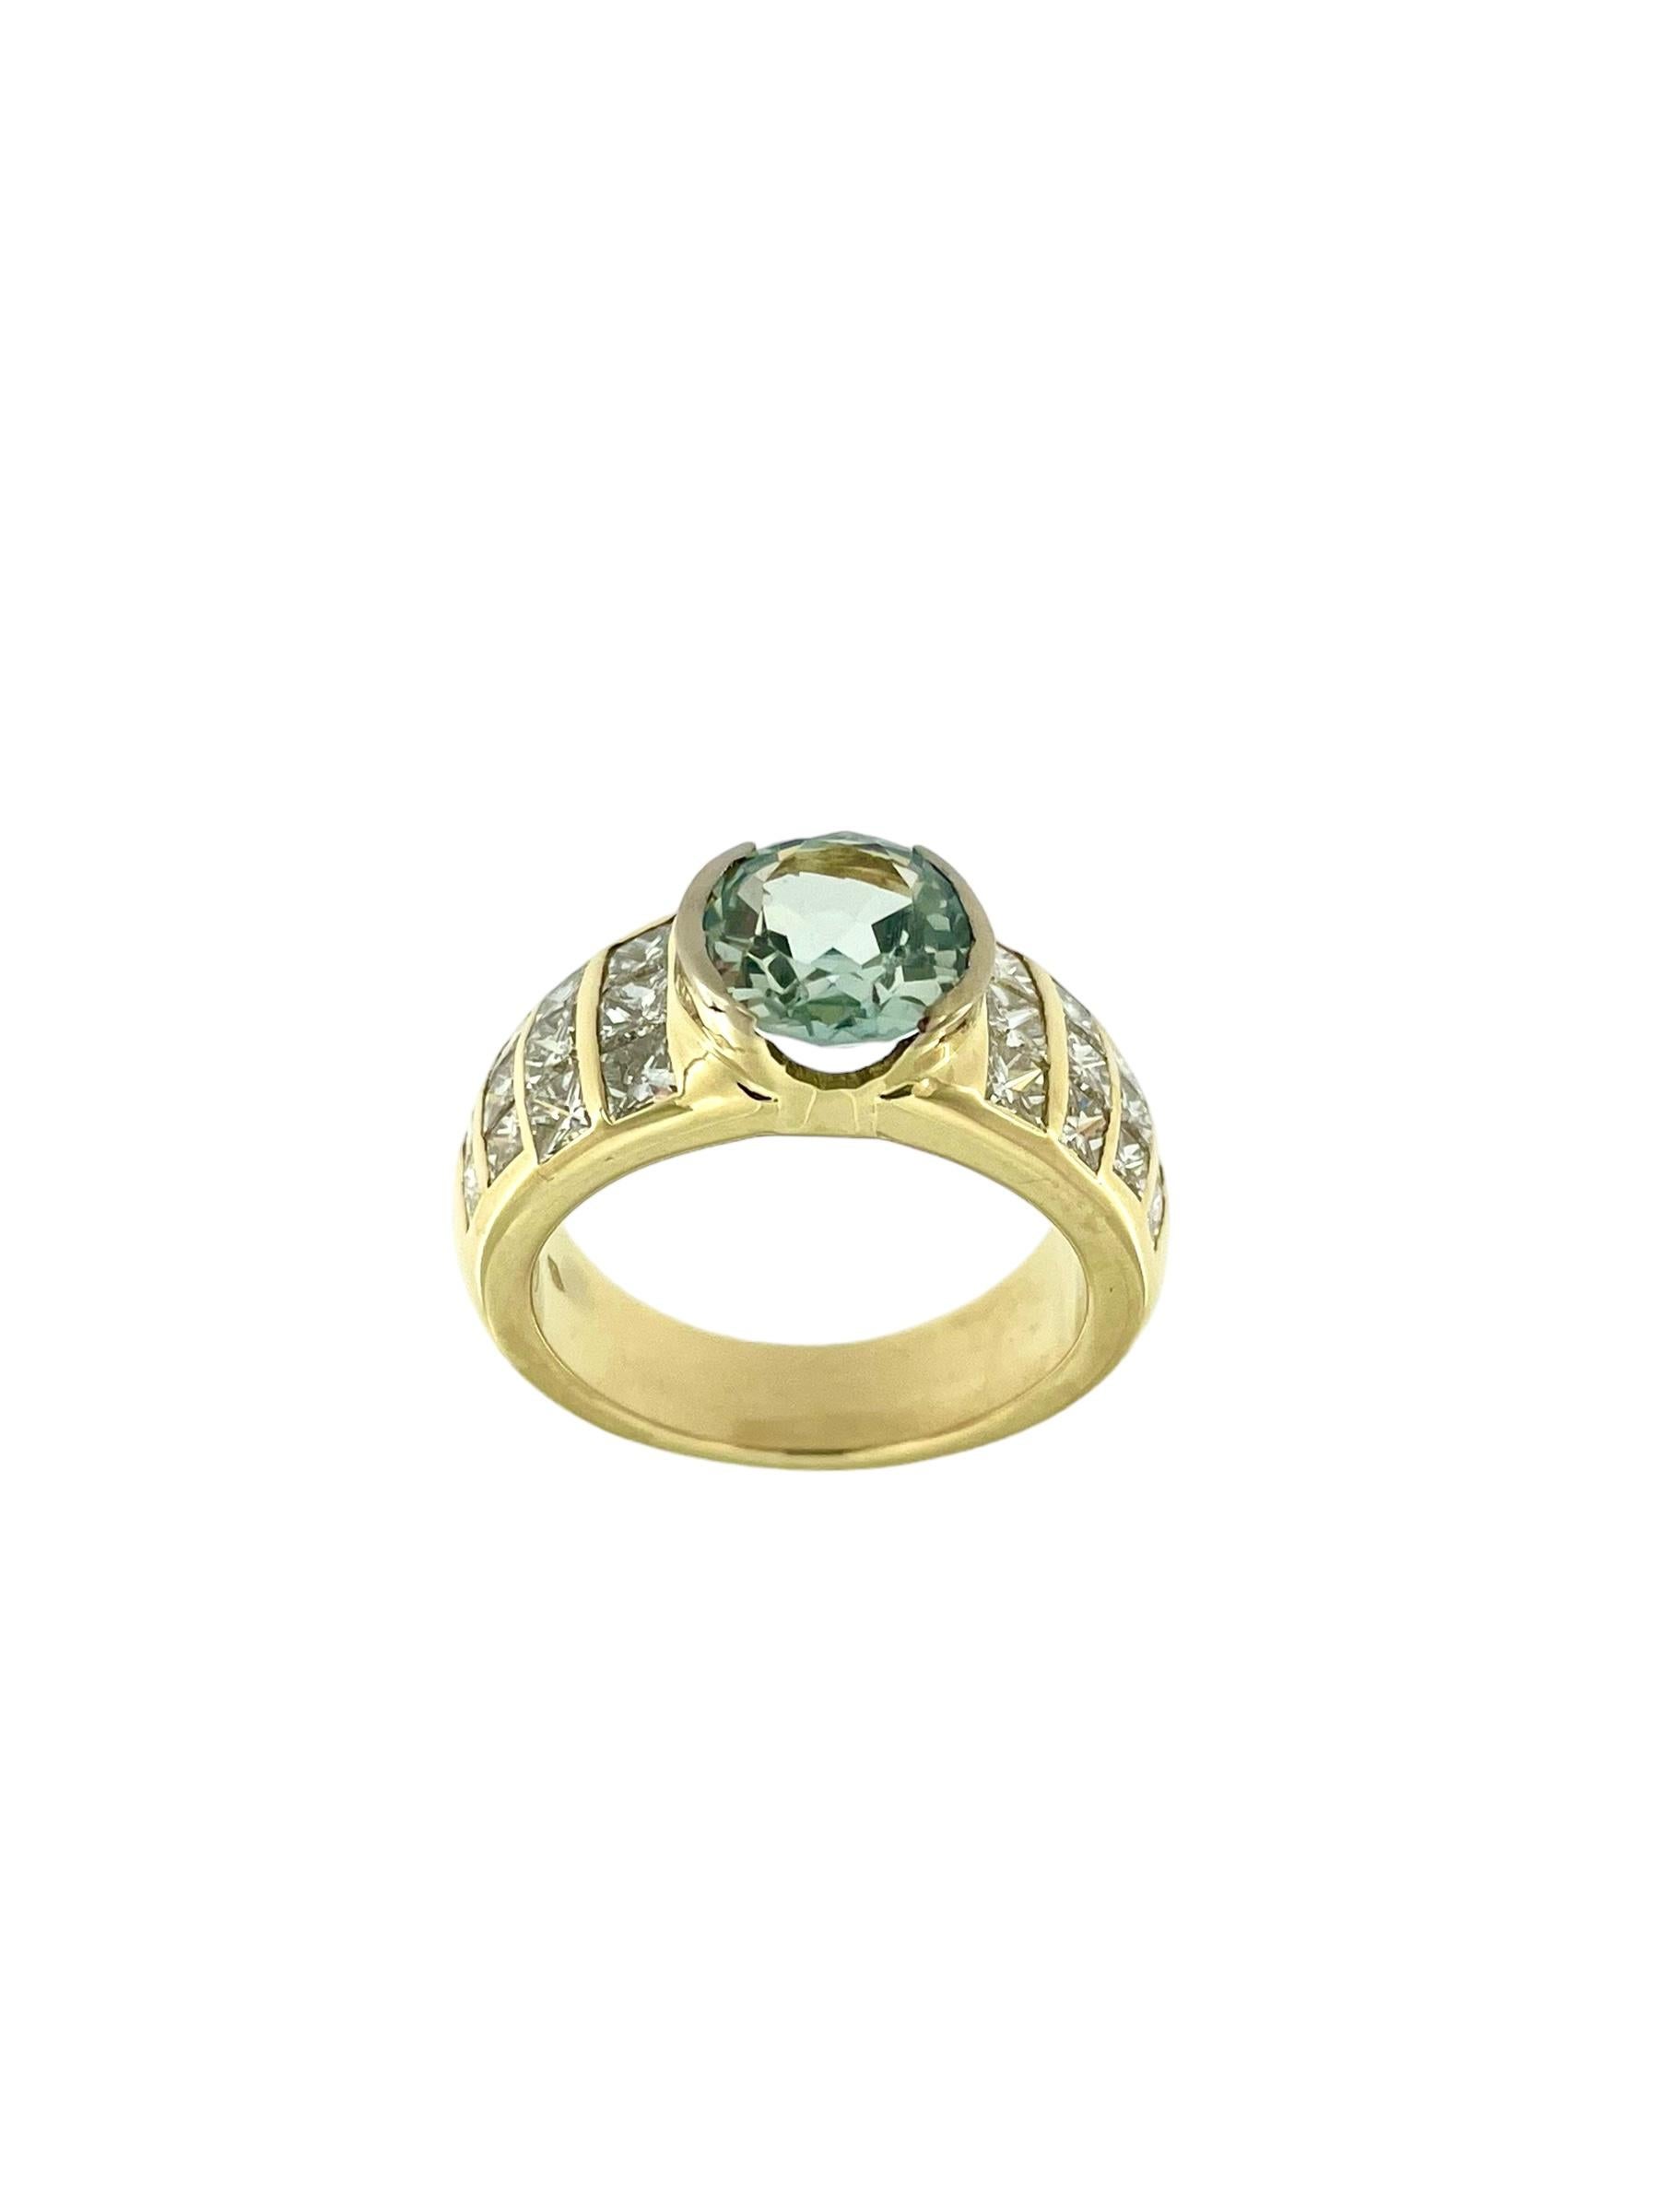 Retro Italian Yellow Gold Ring with Peridot and Diamonds For Sale 2